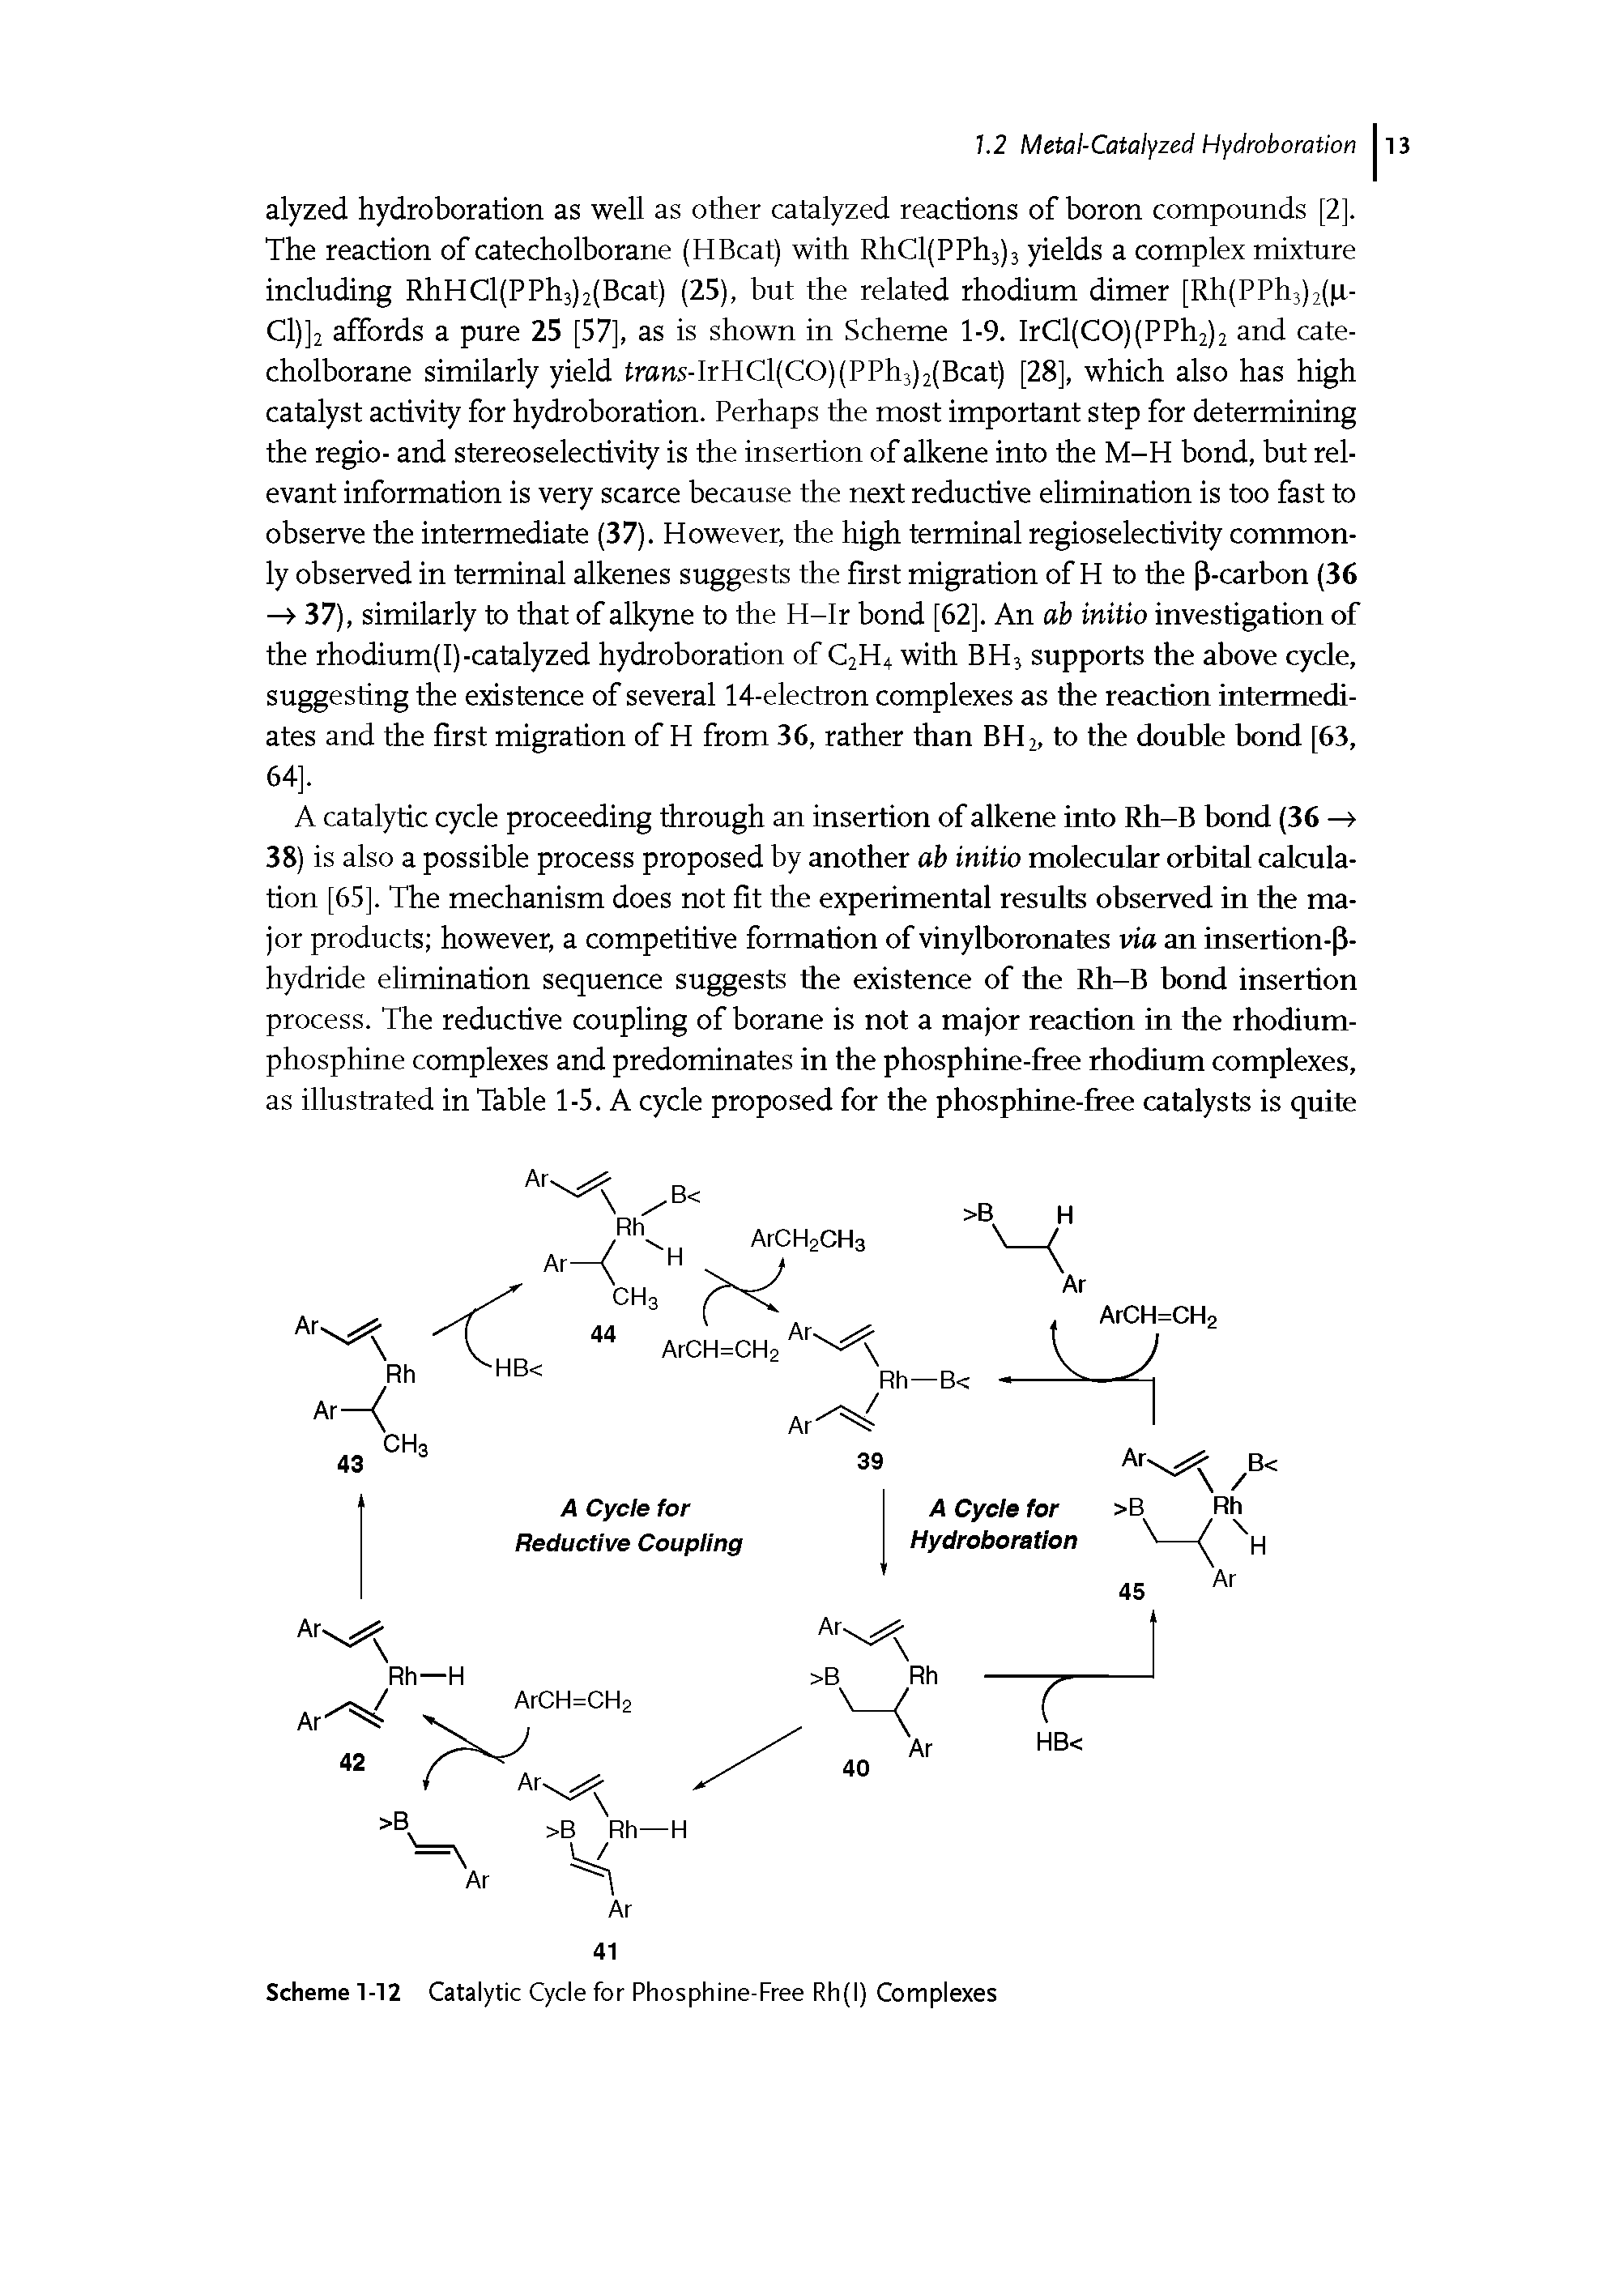 Scheme 1-12 Catalytic Cycle for Phosphine-Free Rh(l) Complexes...